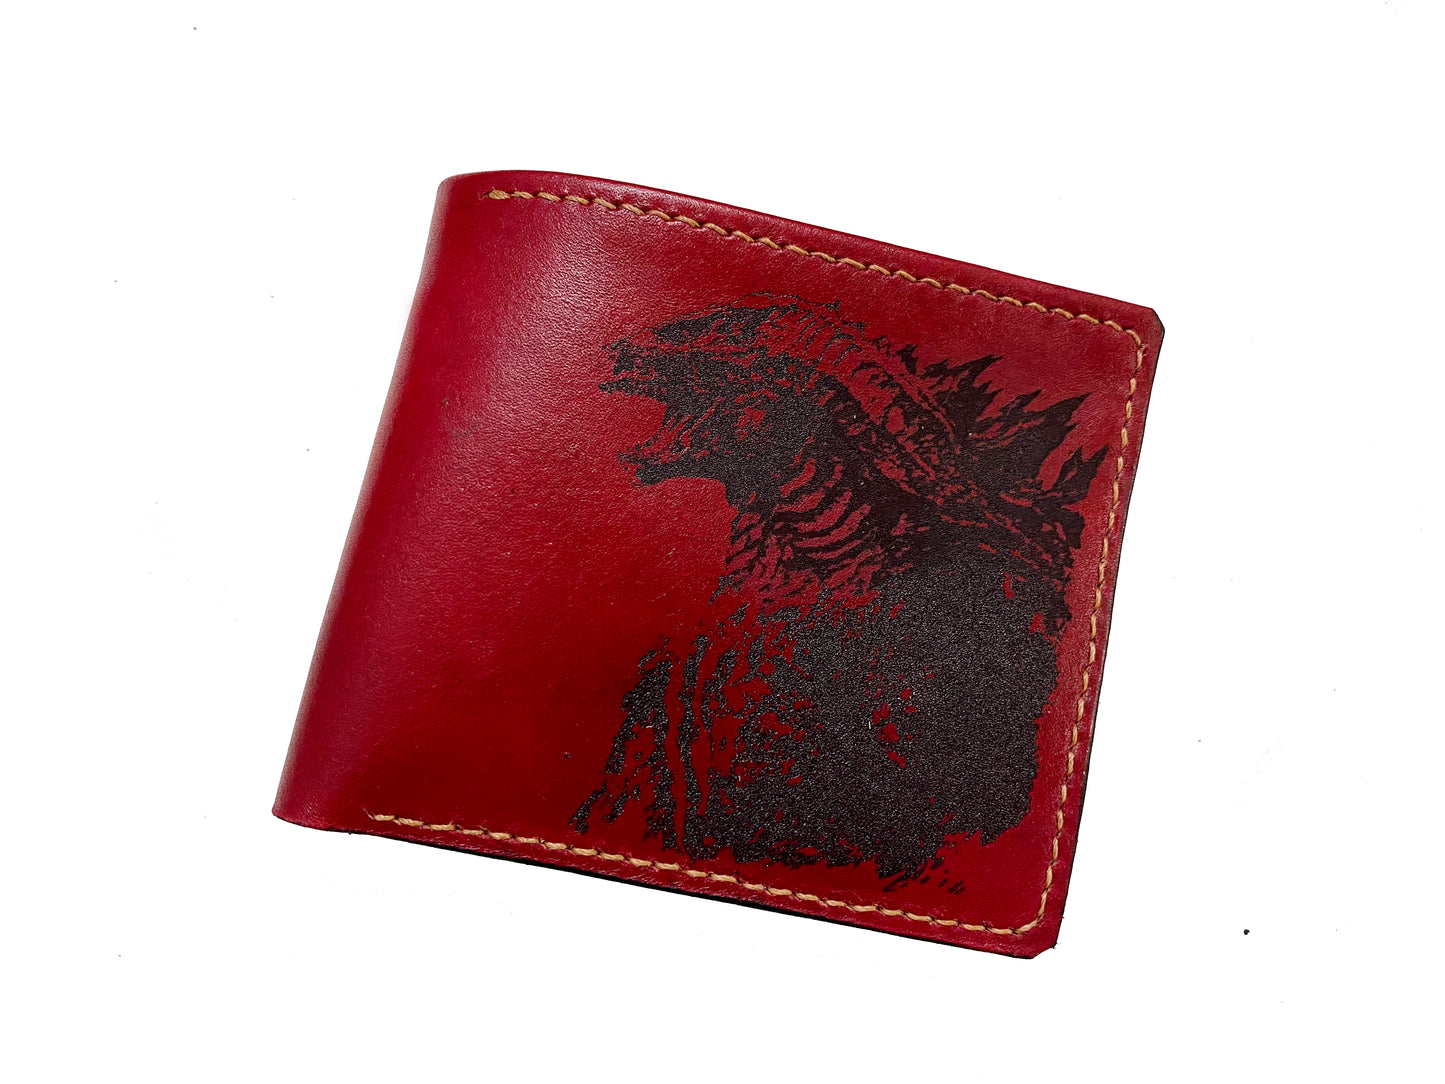 Mayan Corner - Godzilla King of the Monster leather handmade men's wallet, custom gifts for him, father's day gifts